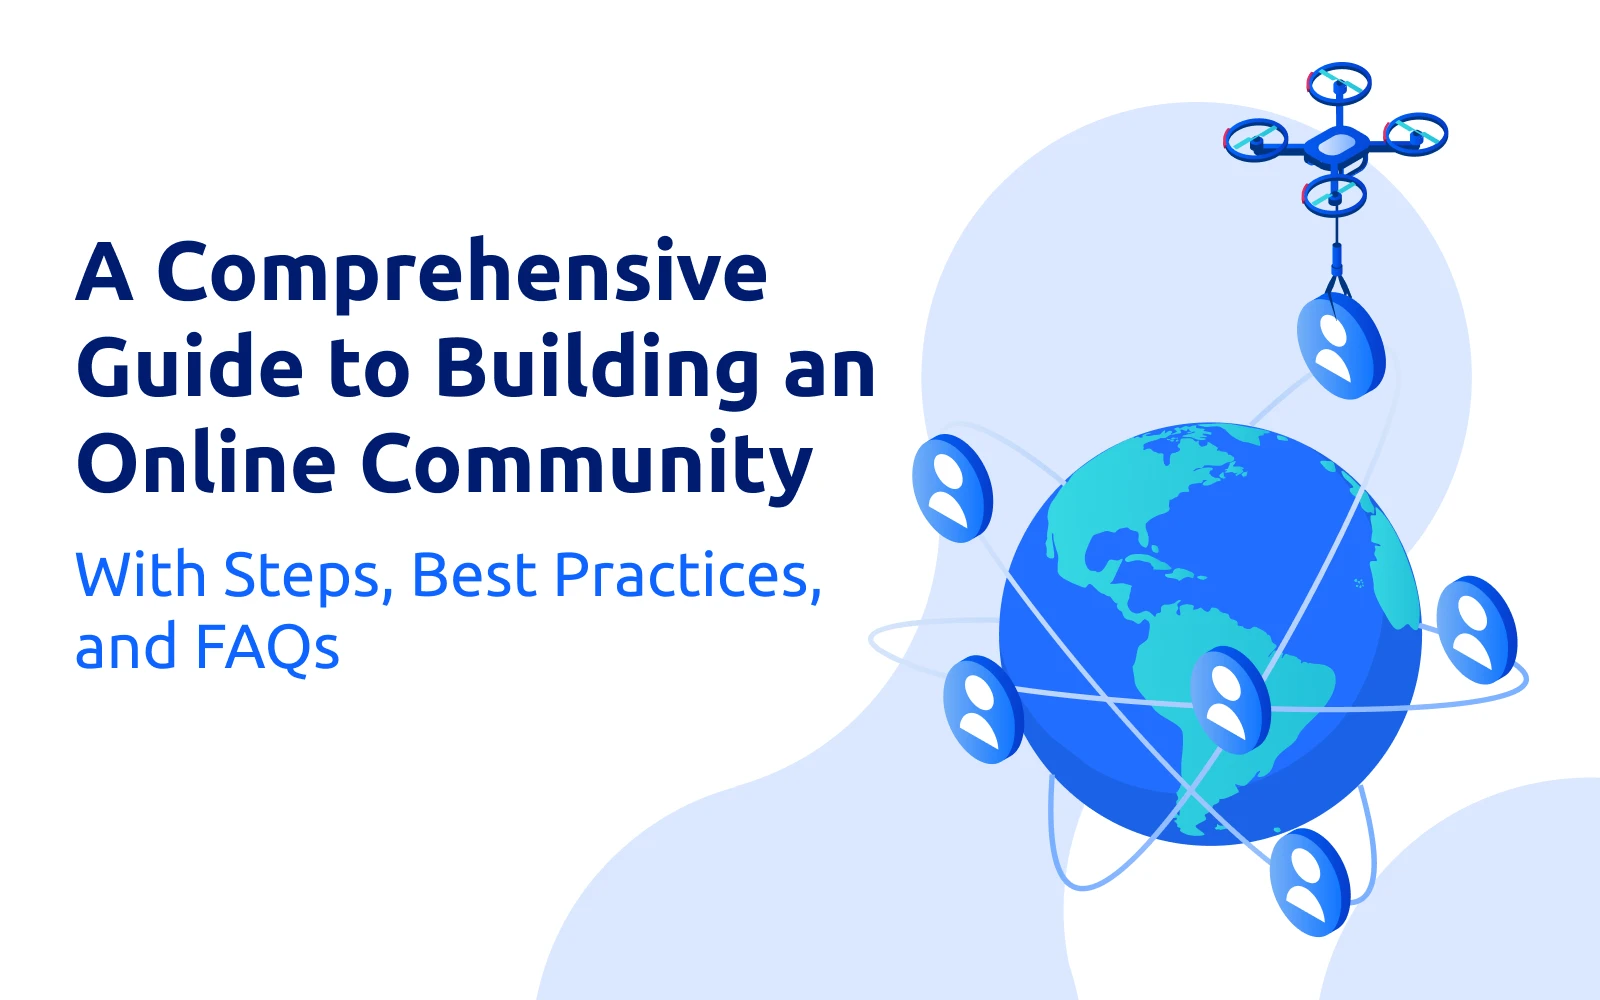 A Comprehensive Guide to Building an Online Community [With Steps, Best Practices, and FAQs]